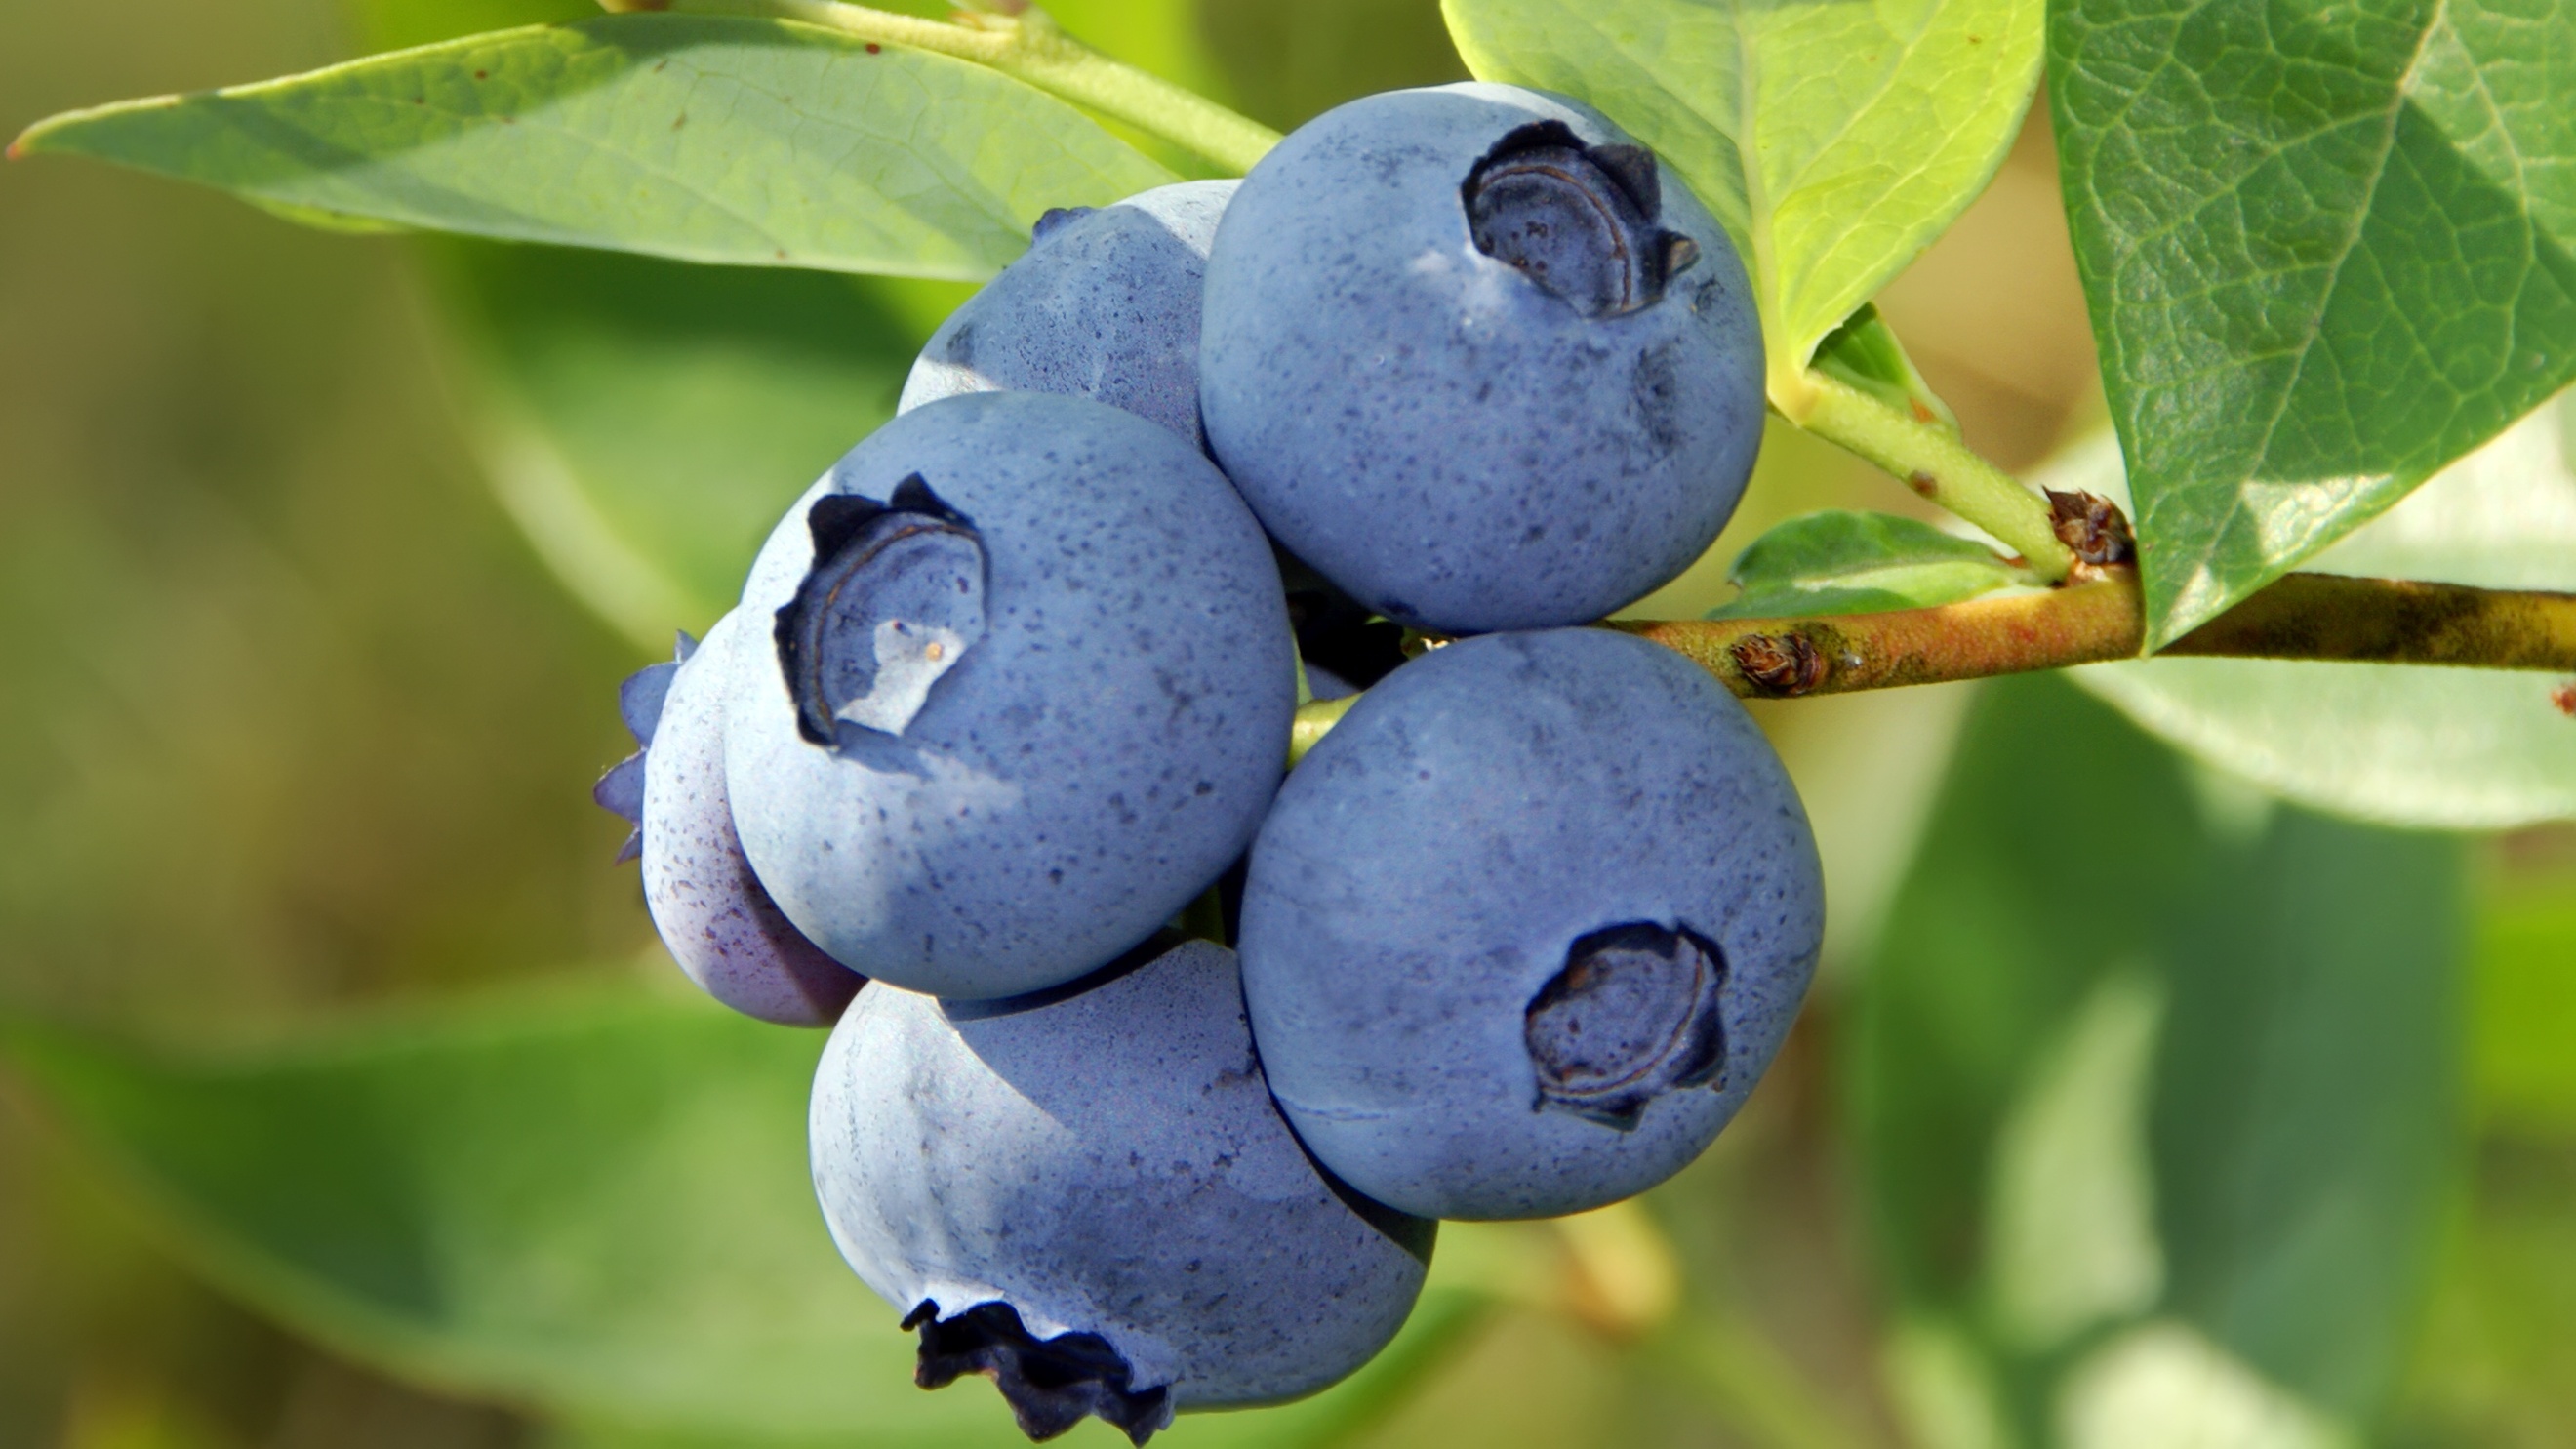 How to Blueberry Bush From One Berry Woman's World